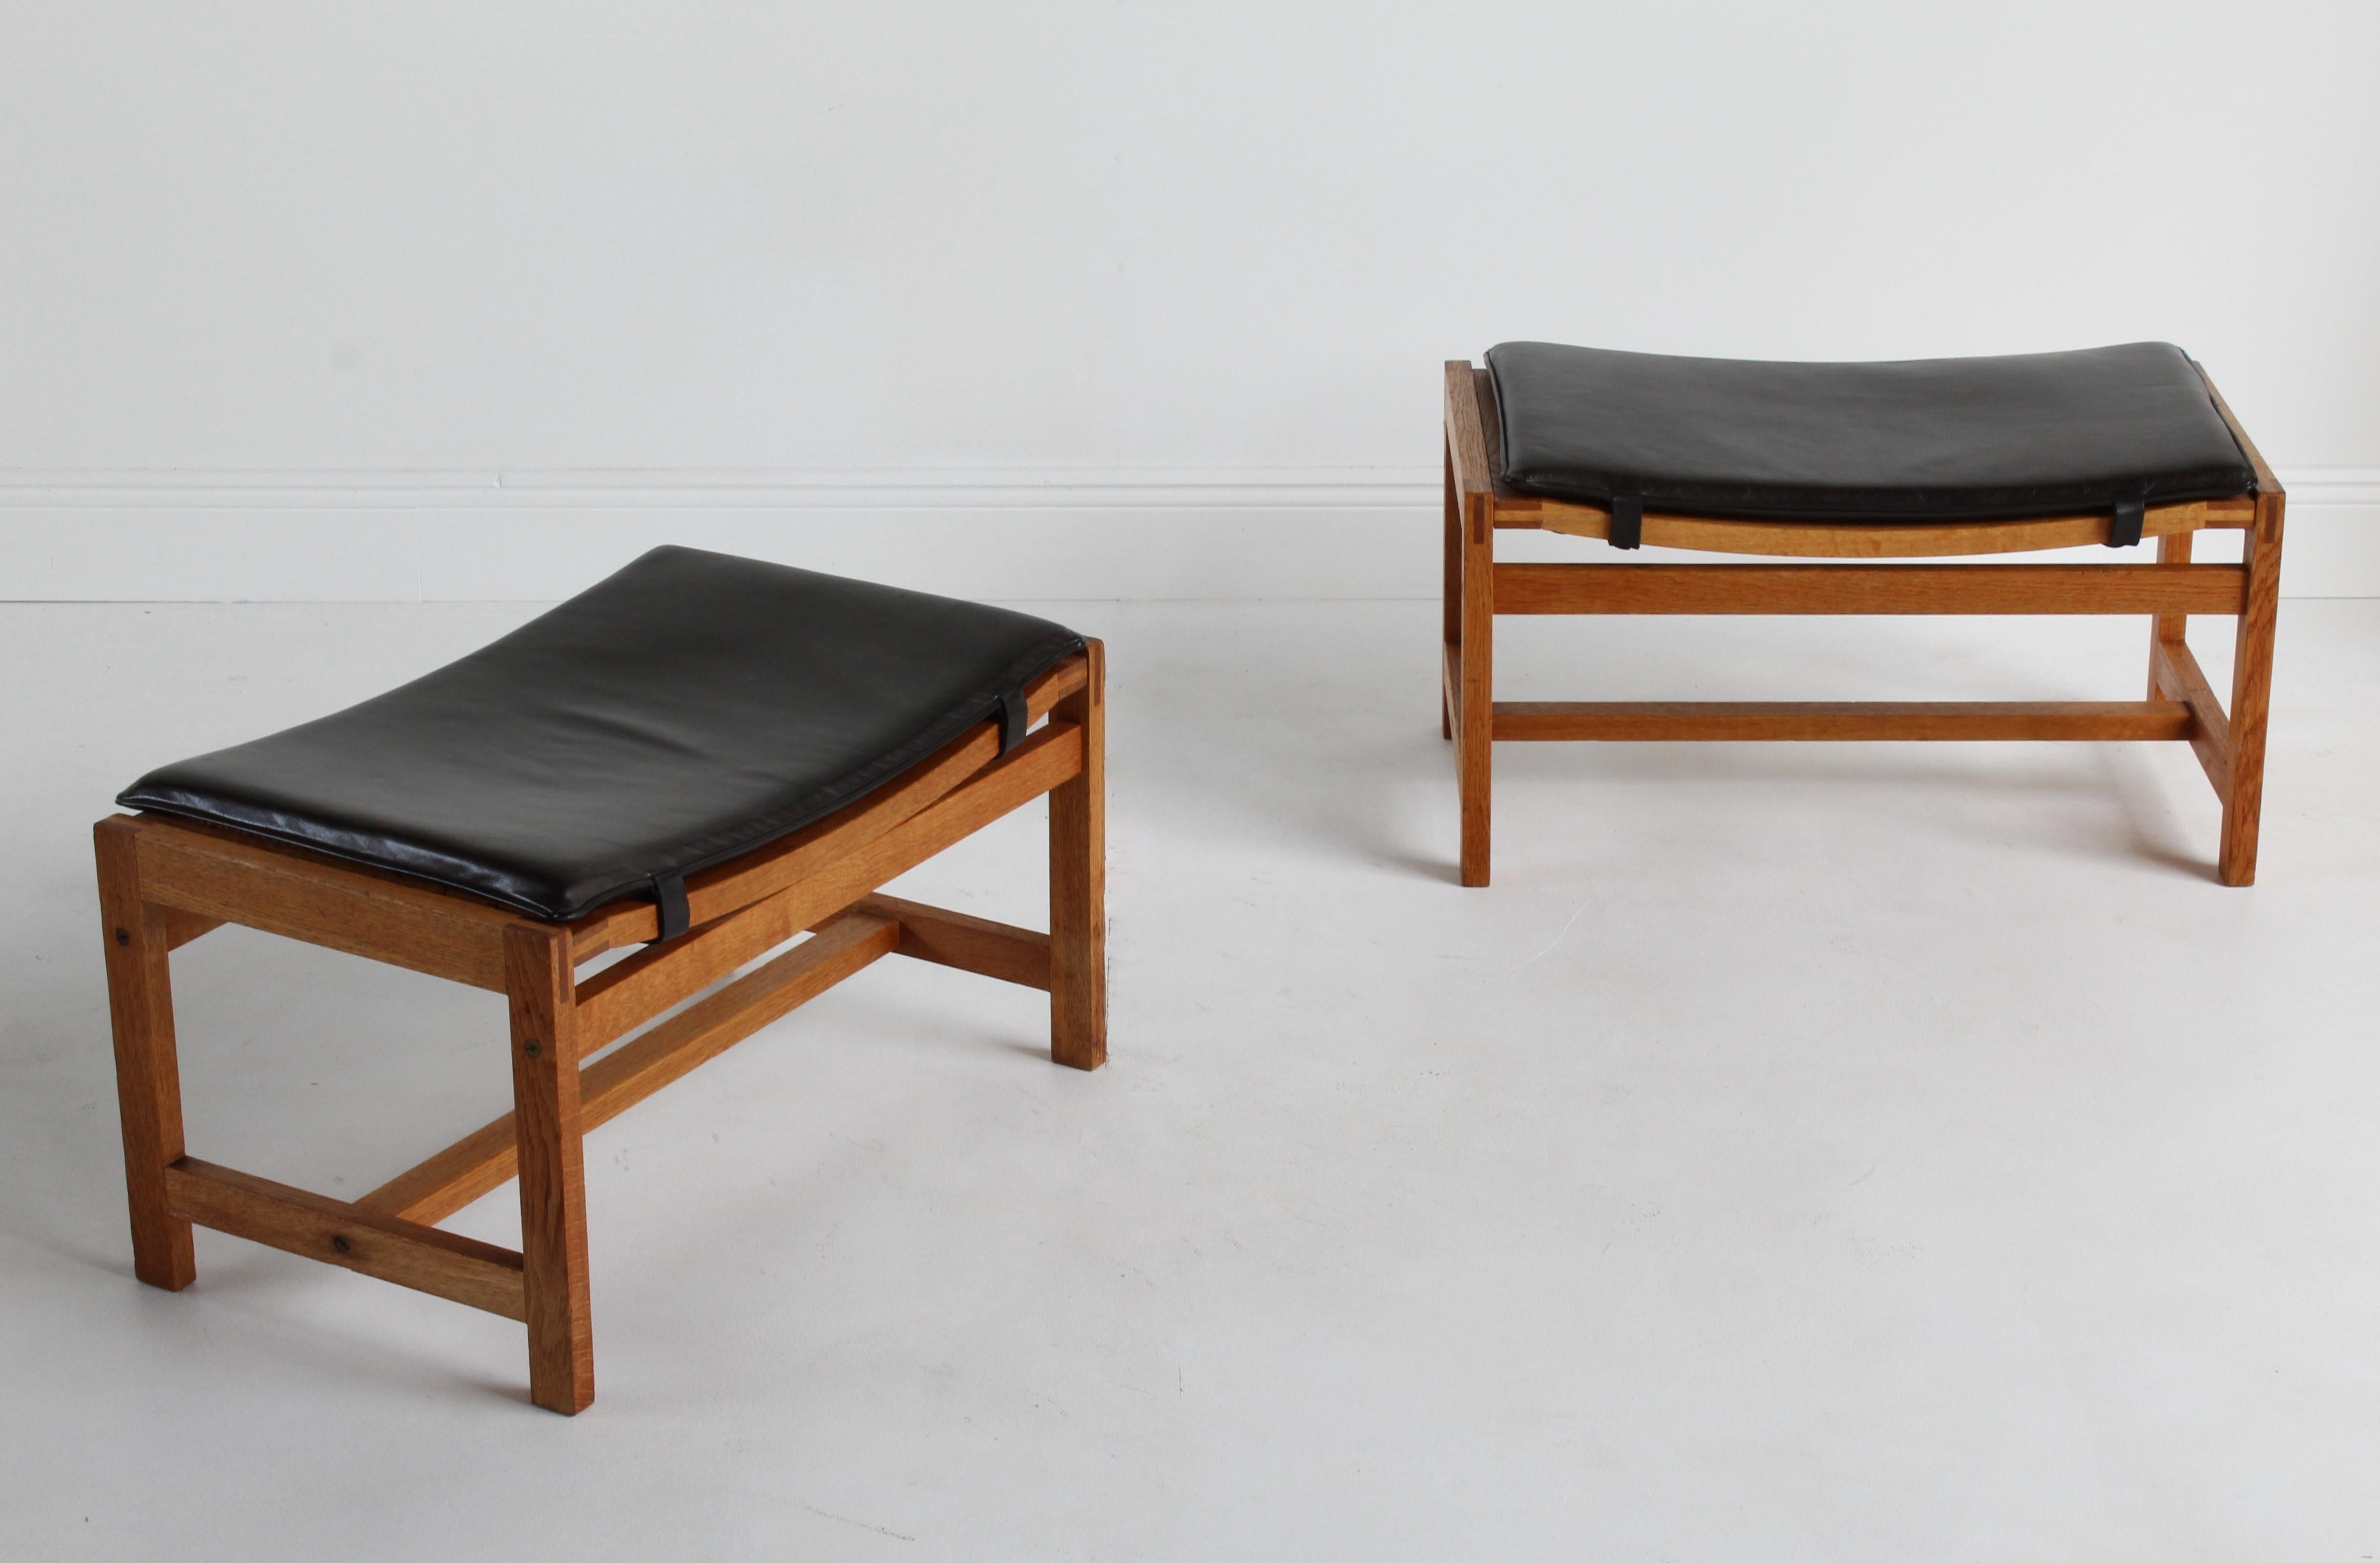 A pair of stools / ottomans designed by Peter Hjorth and Arne Karlsen in 1959. Produced by Interna, and executed in oak, with the original webbed cane, and black dyed leather. Bears brass label. Production is of high-level craftsmanship and quality